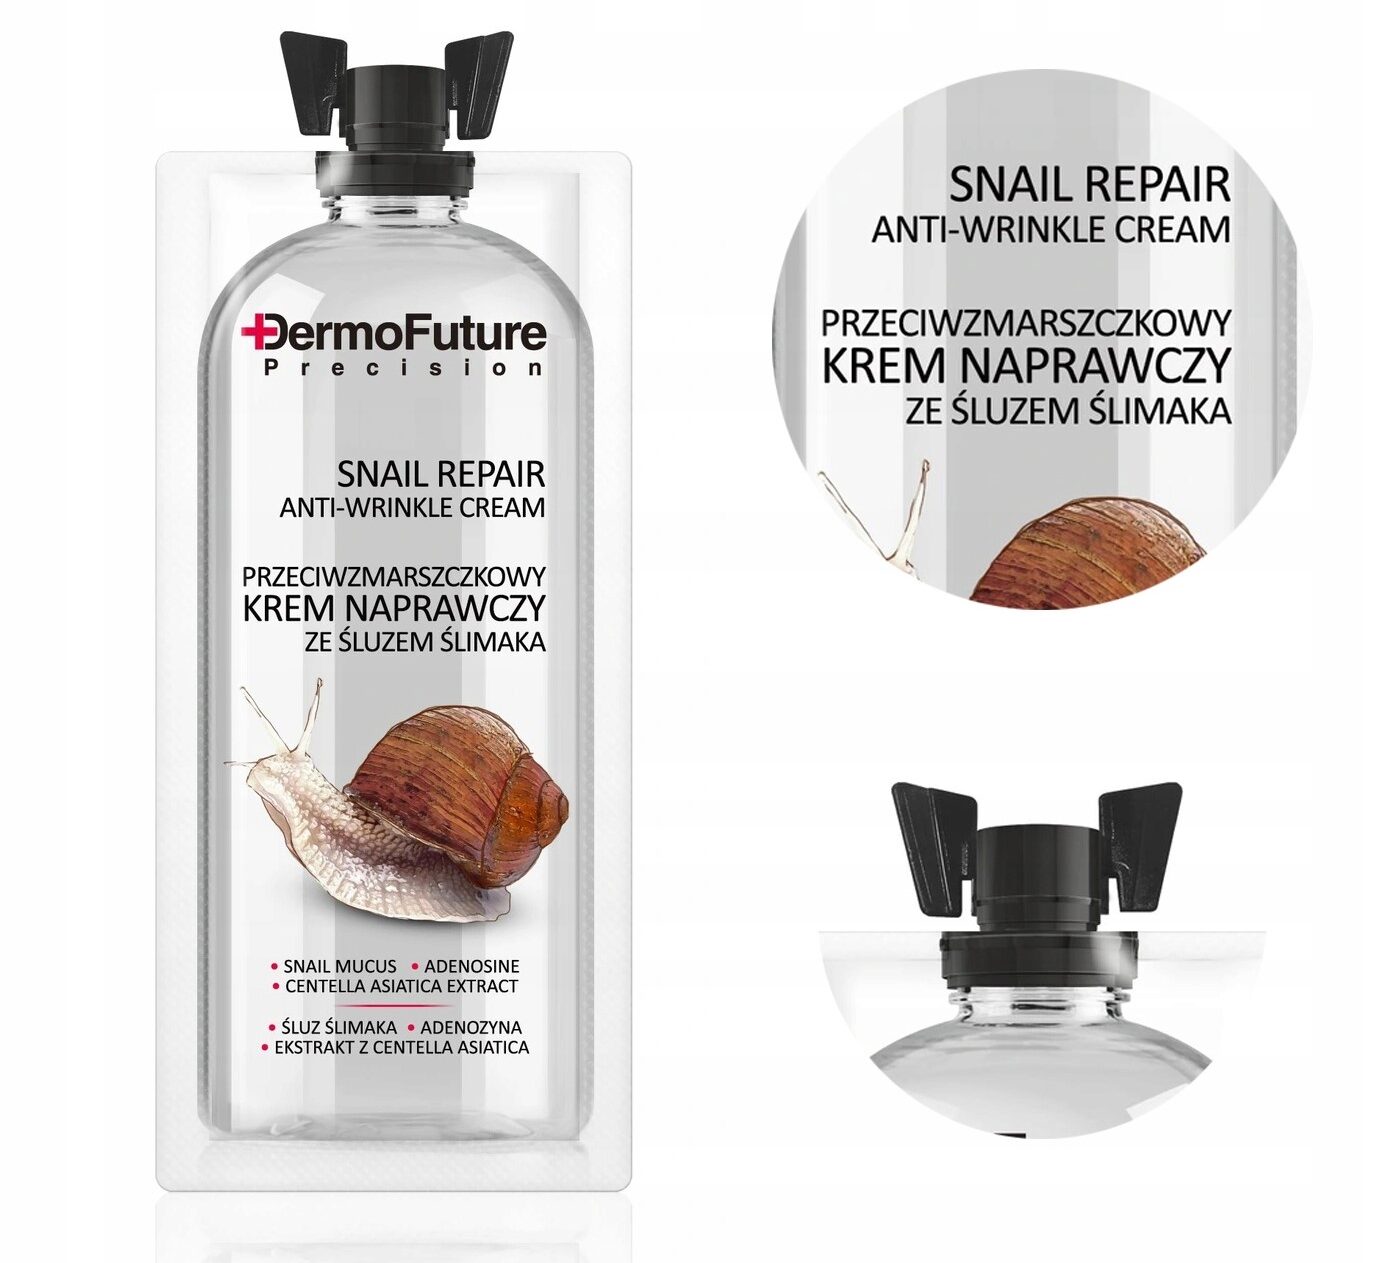 Say goodbye to pesky signs of aging with “Dermofuture Snail Repair Anti-Wrinkle Cream”